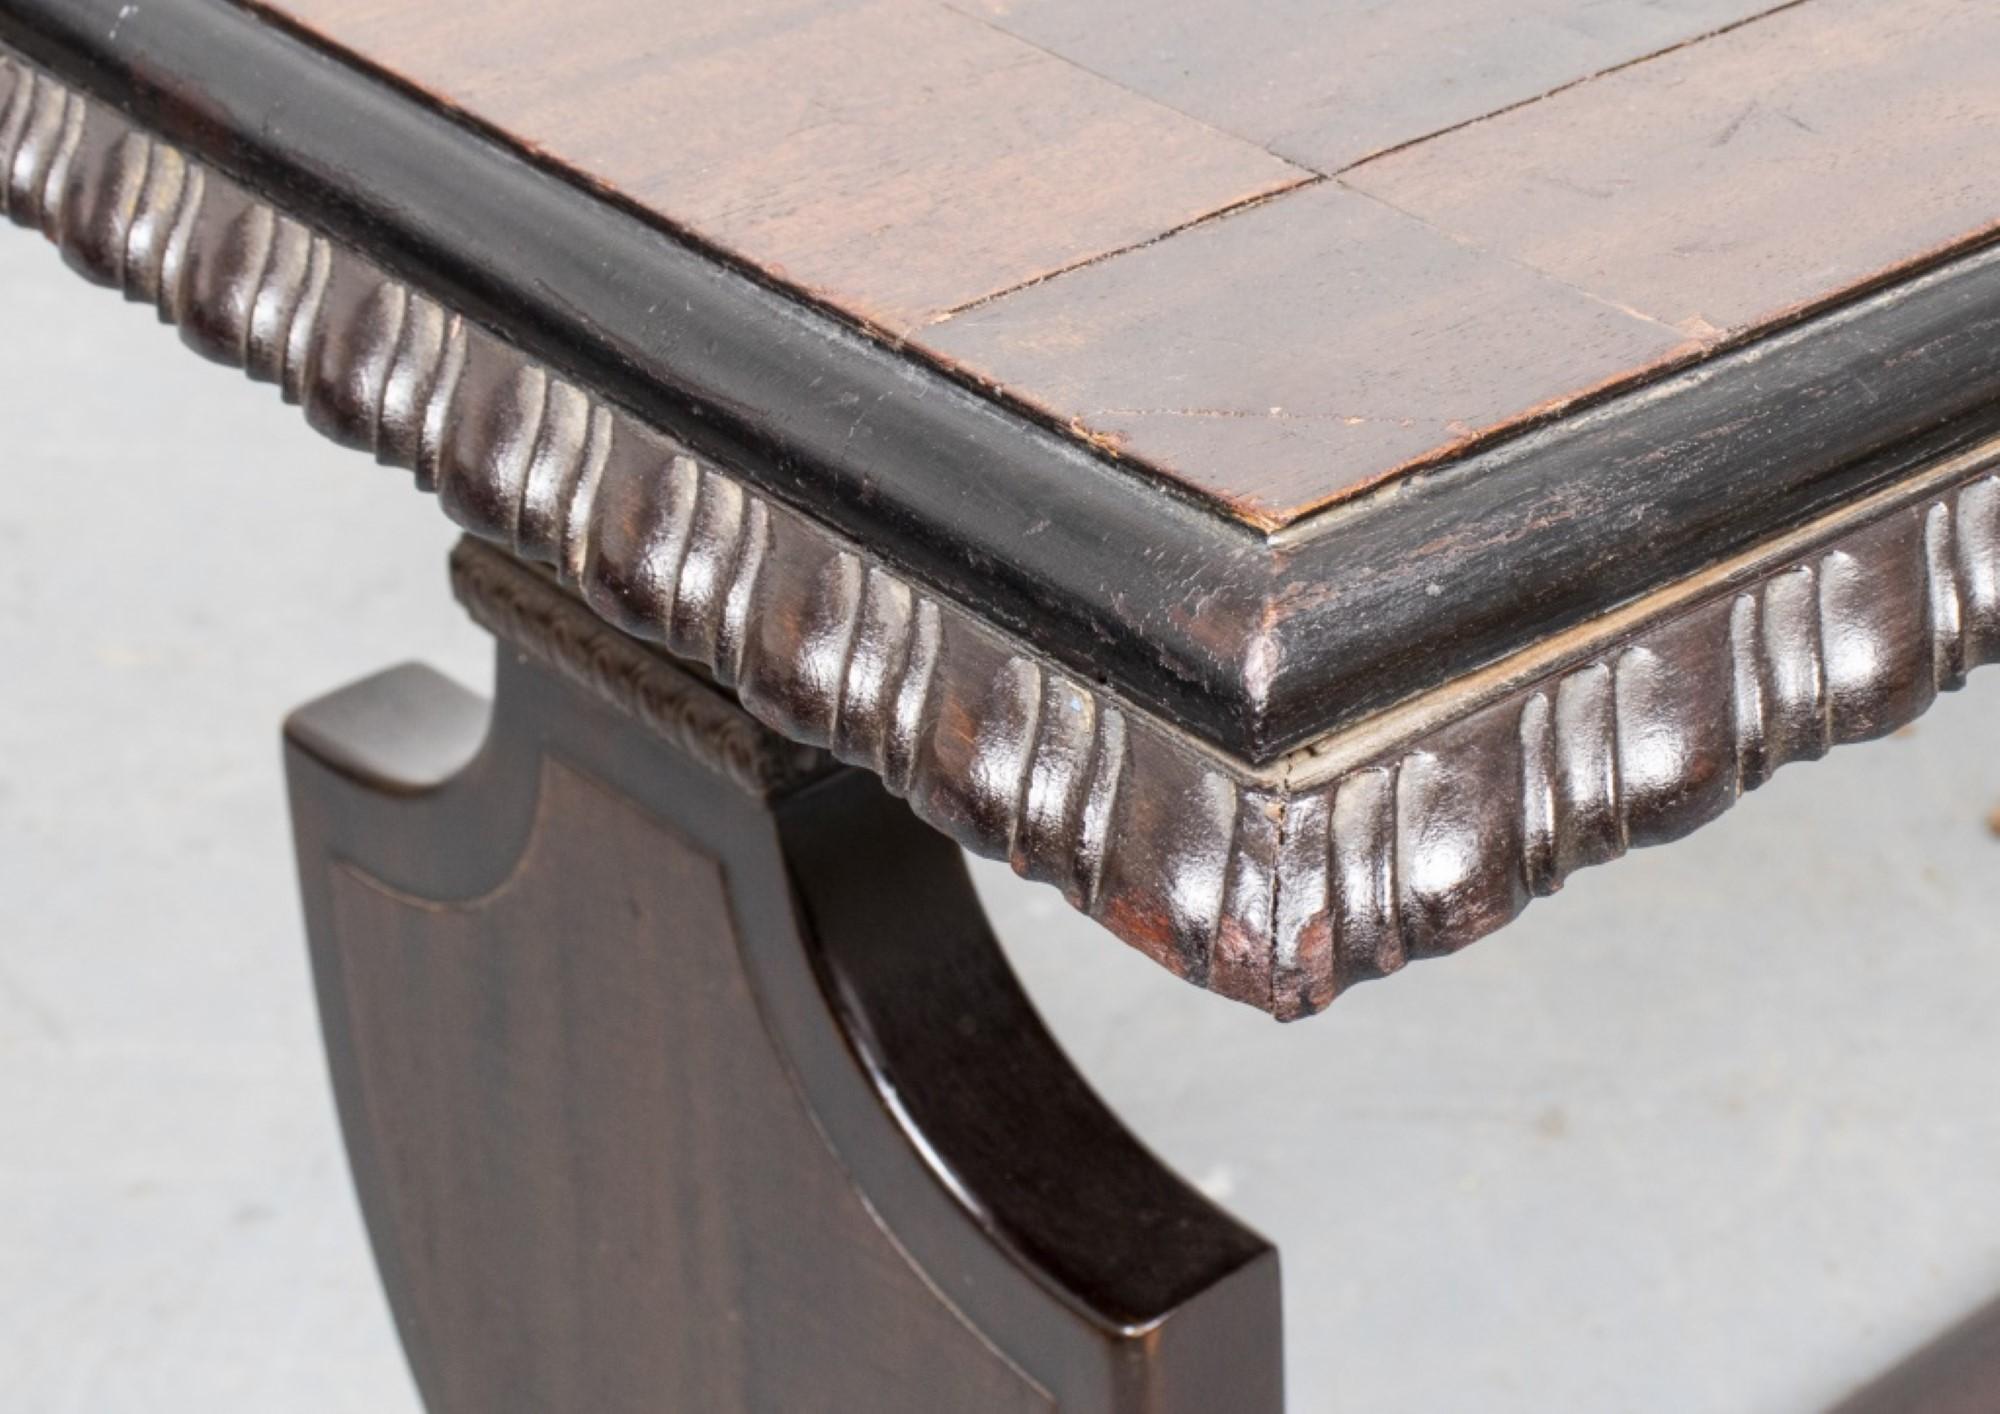 Renaissance style oak library table or desk, the top with carved details over the shield-form legs.

Dealer: S138XX